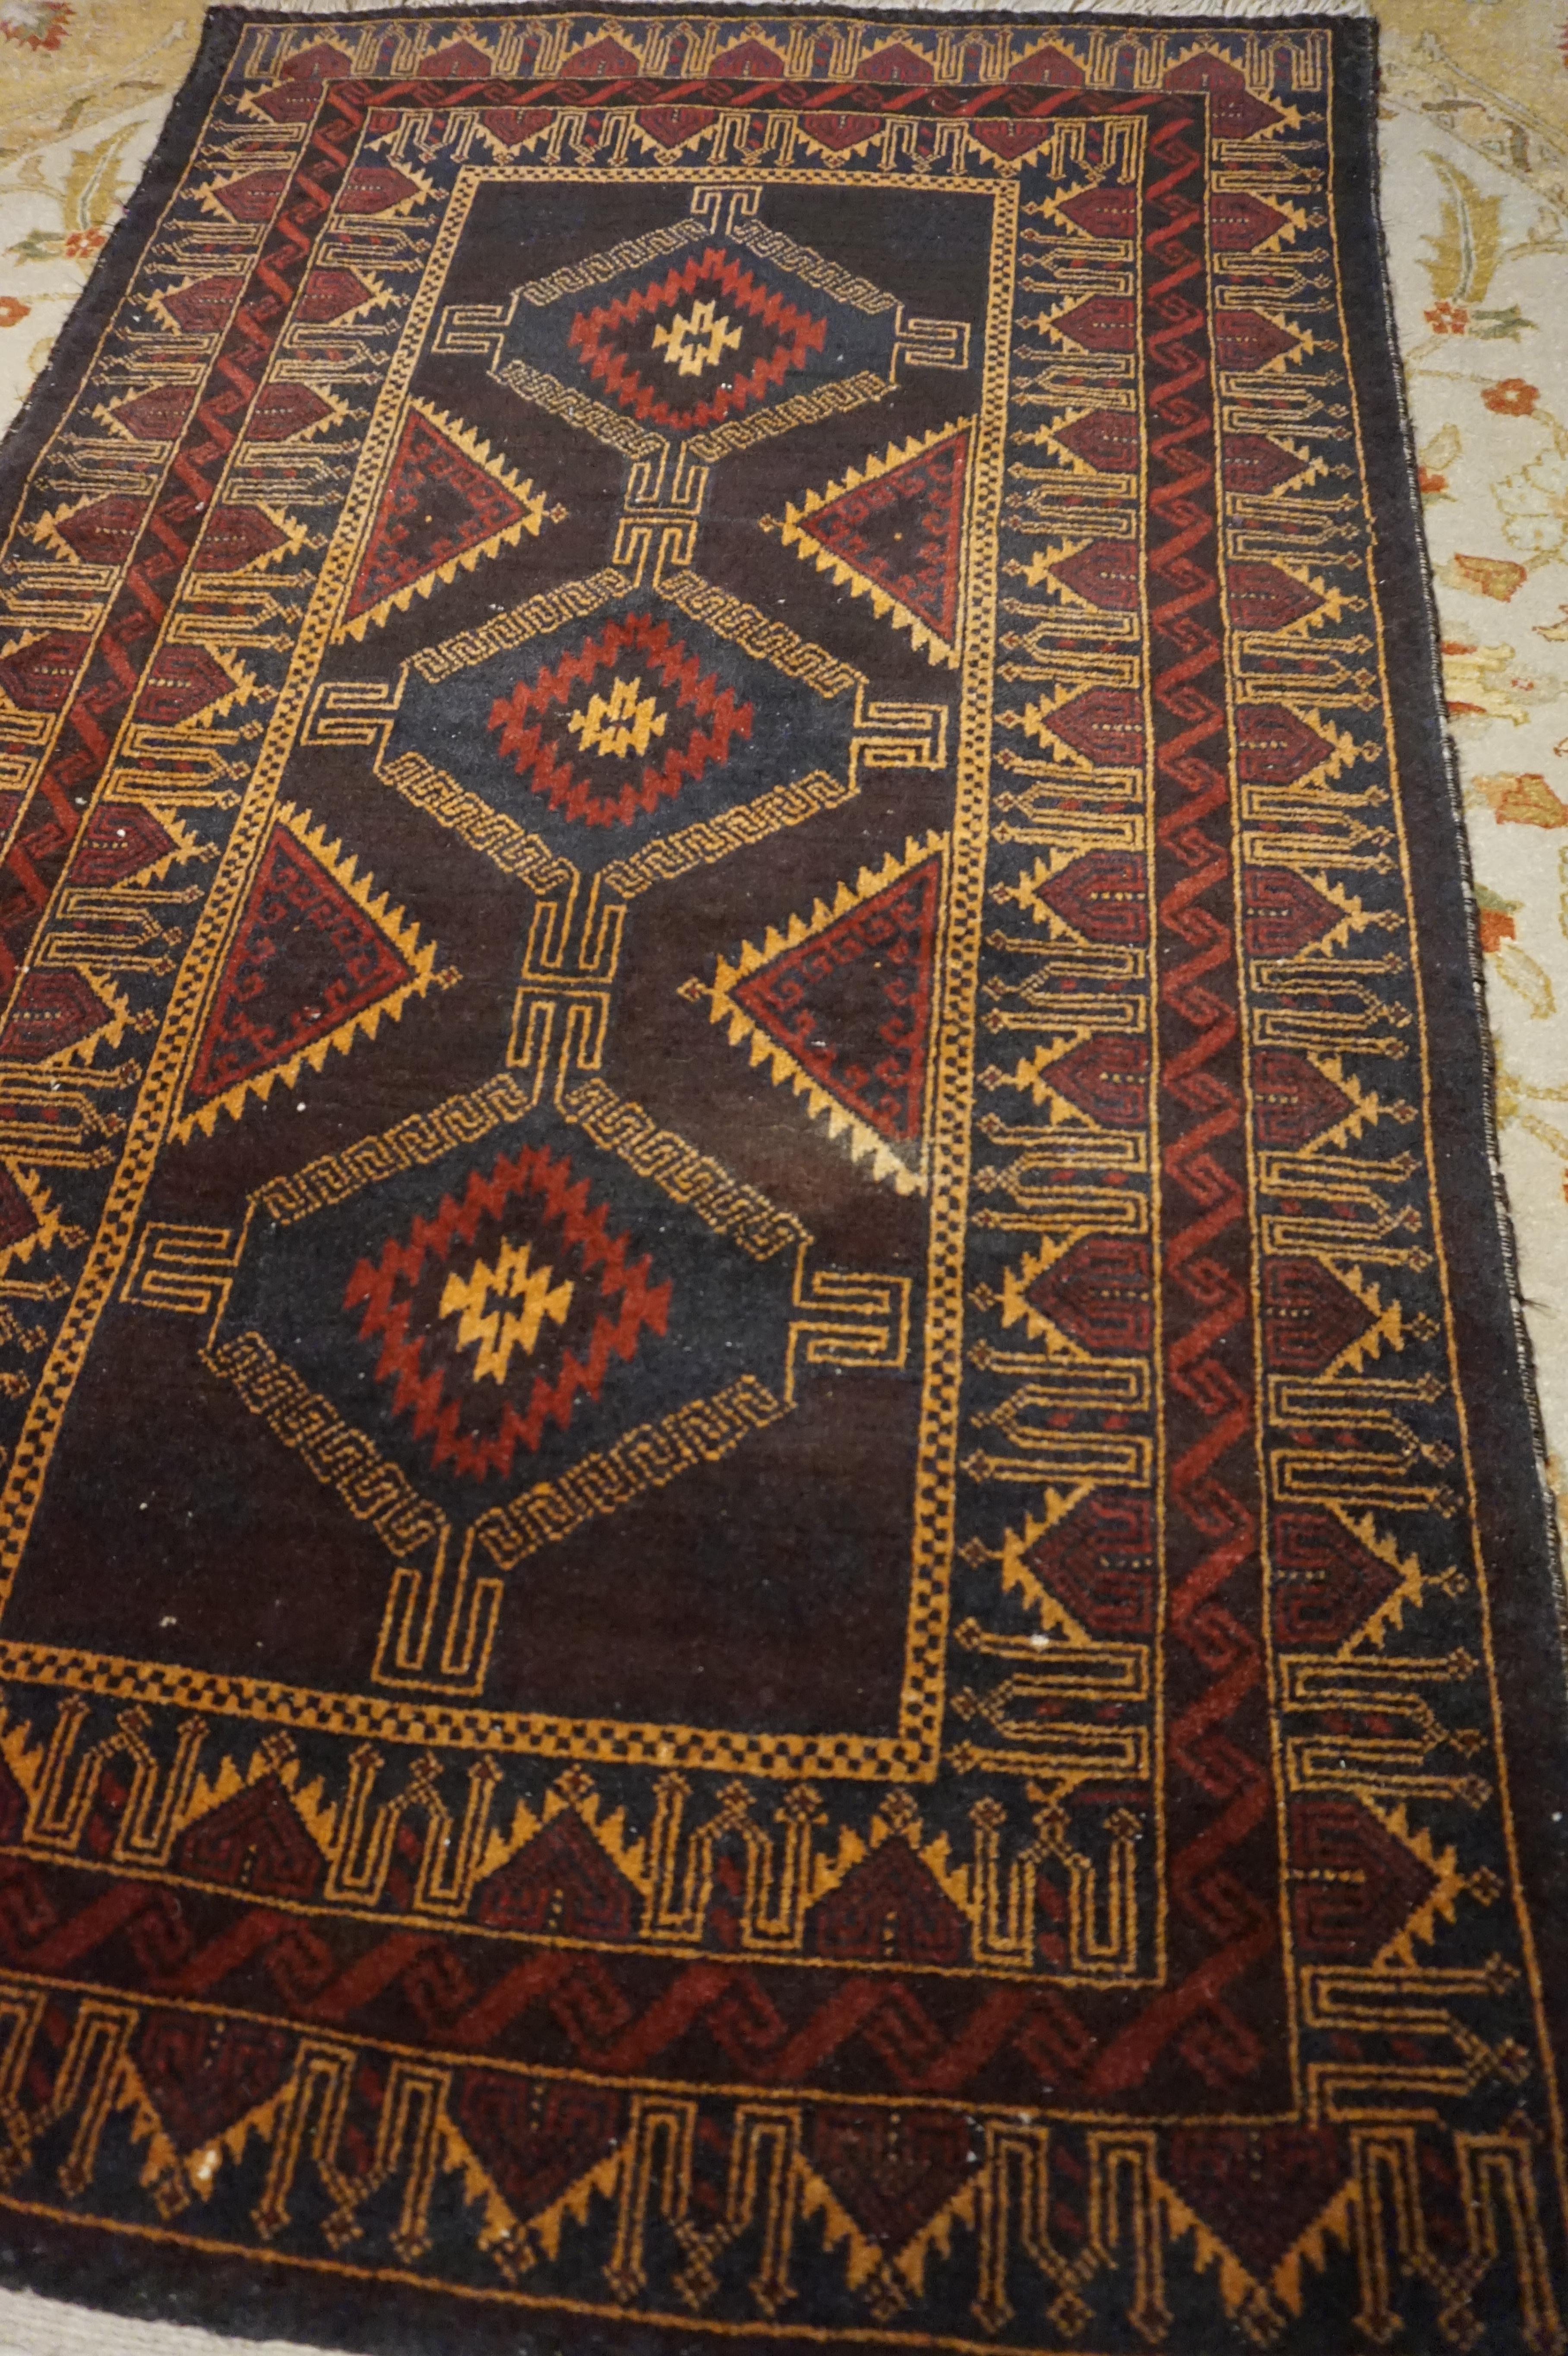 Central Asian Fine Hand Knotted Semi-Antique Wool Baluch Tribal Rug